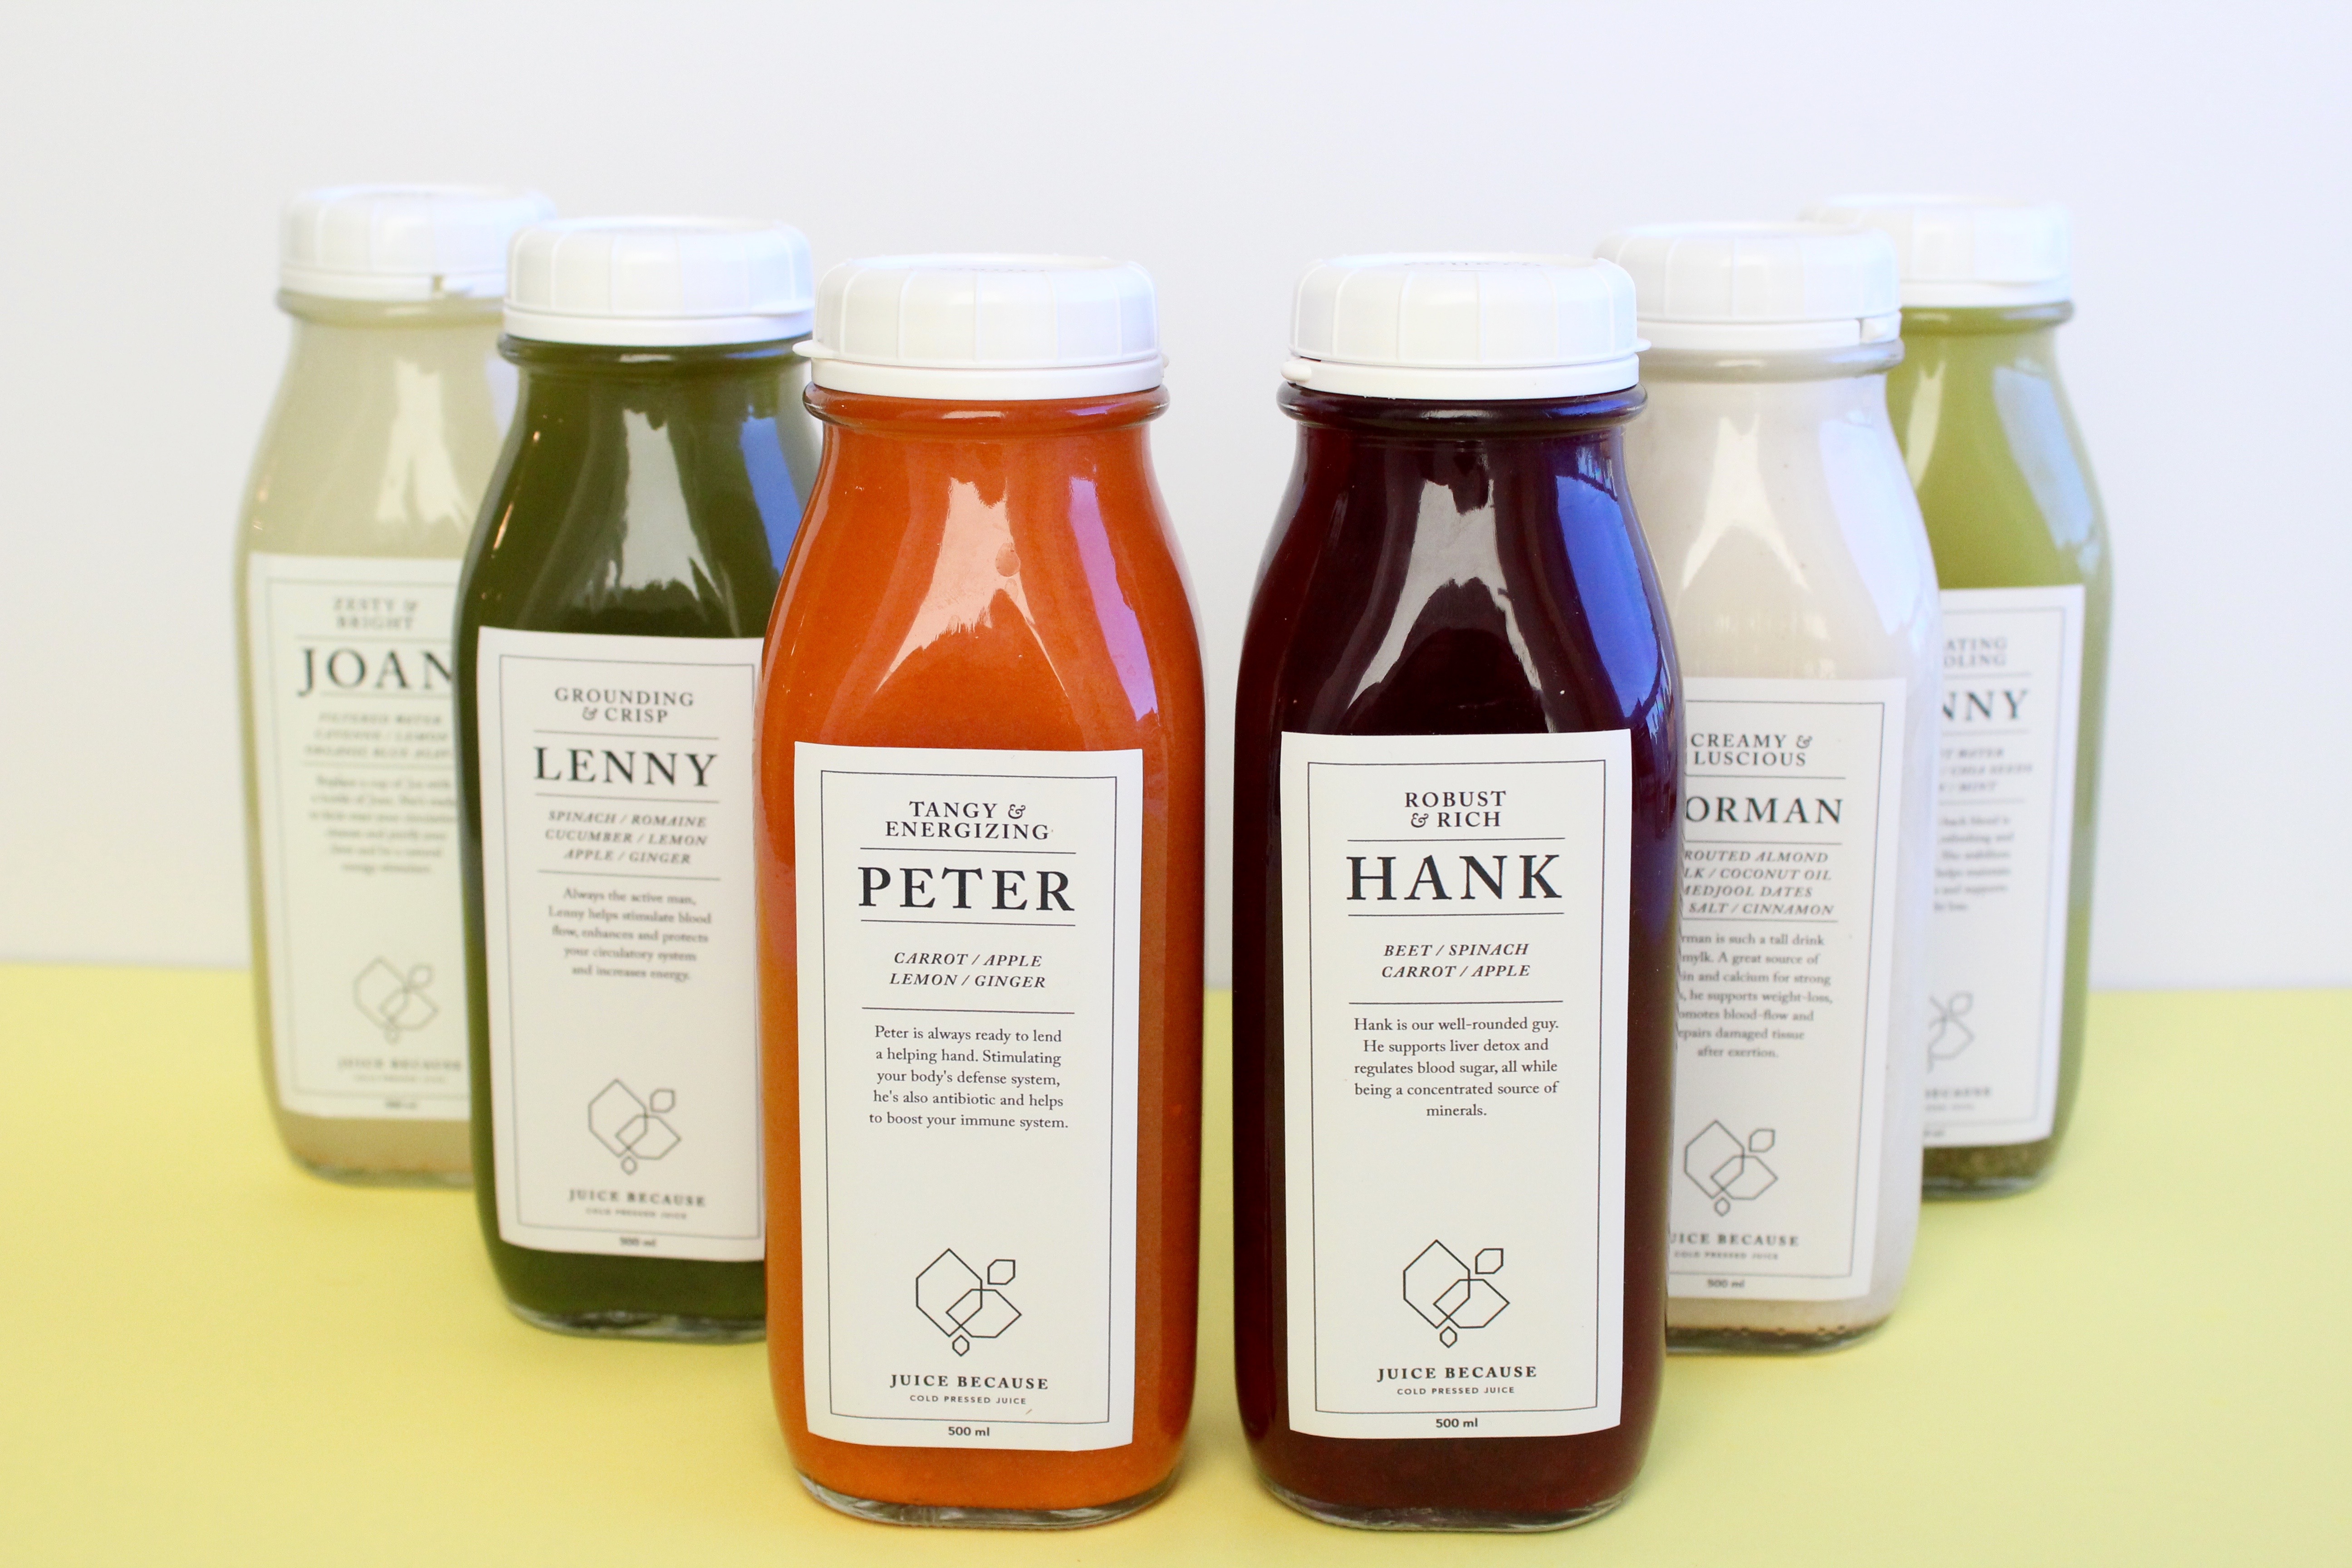 Juice Cleanse Recap and Review: What to expect from a 3-day juice cleanse